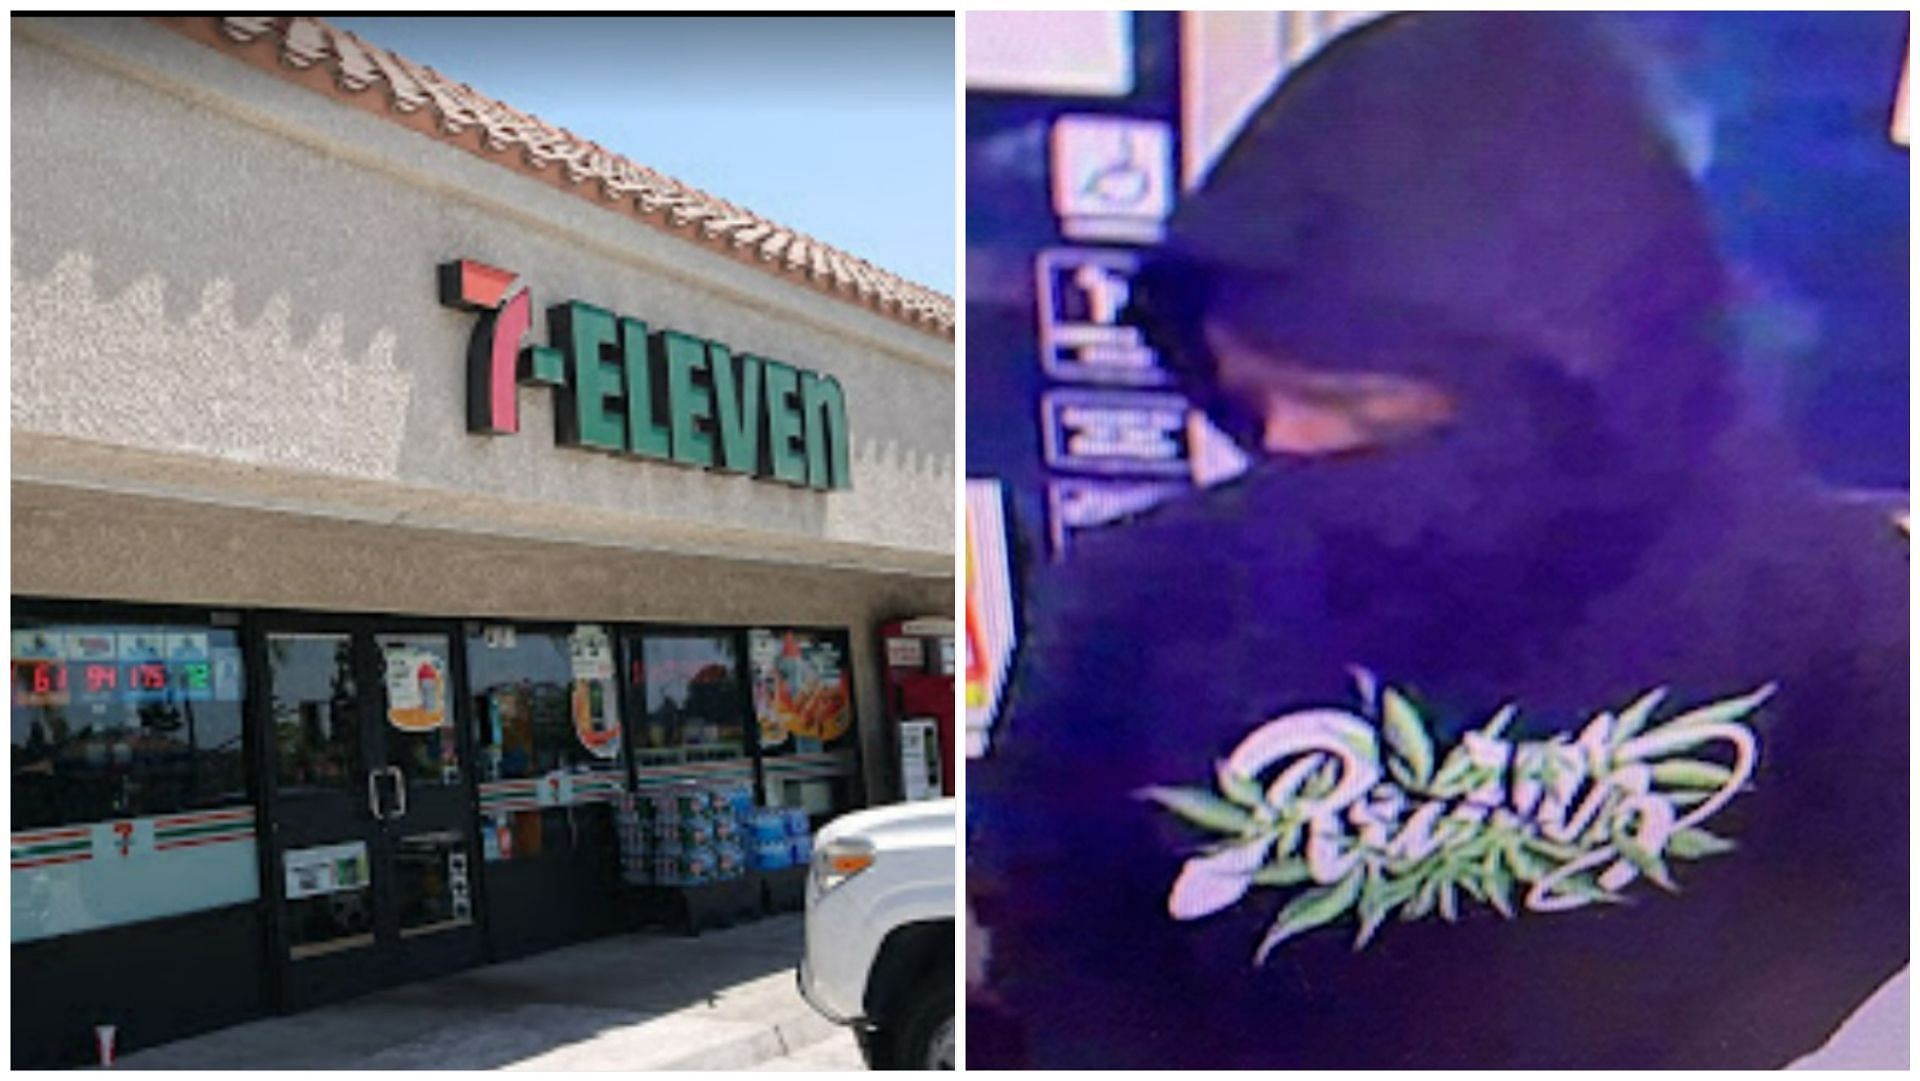 Police say the suspect is a black male responsible for shootings across 7-Eleven stores (Image via Brea PD/Google Maps)